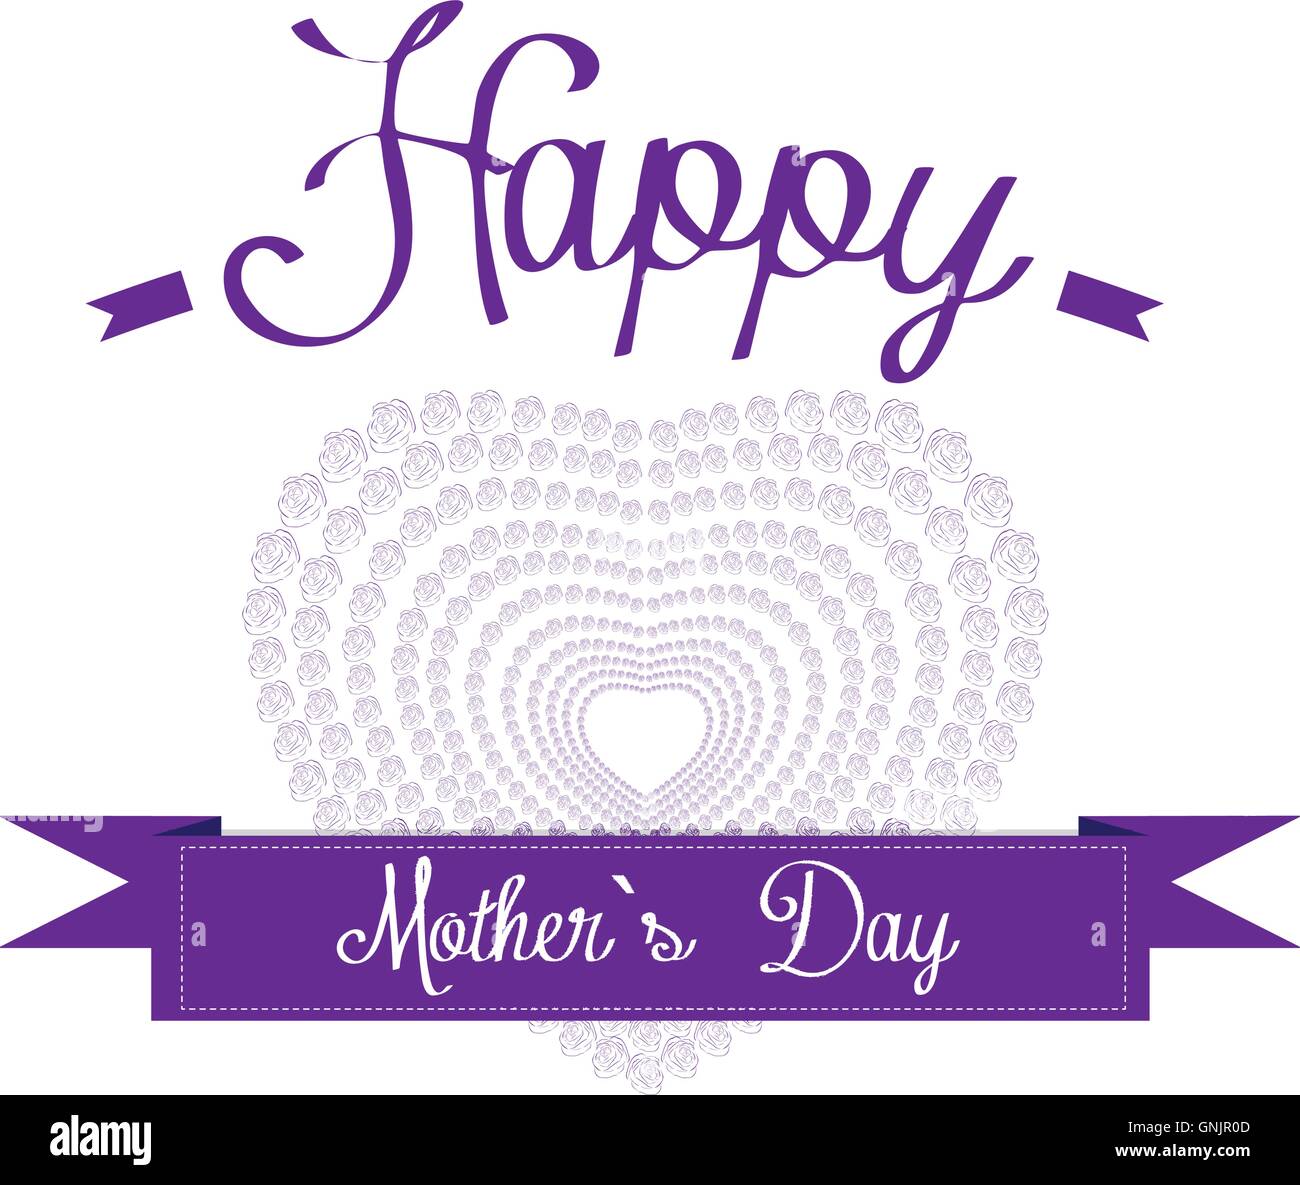 Isolated heart composed with roses and text on a white background for mother's day celebrations Stock Vector